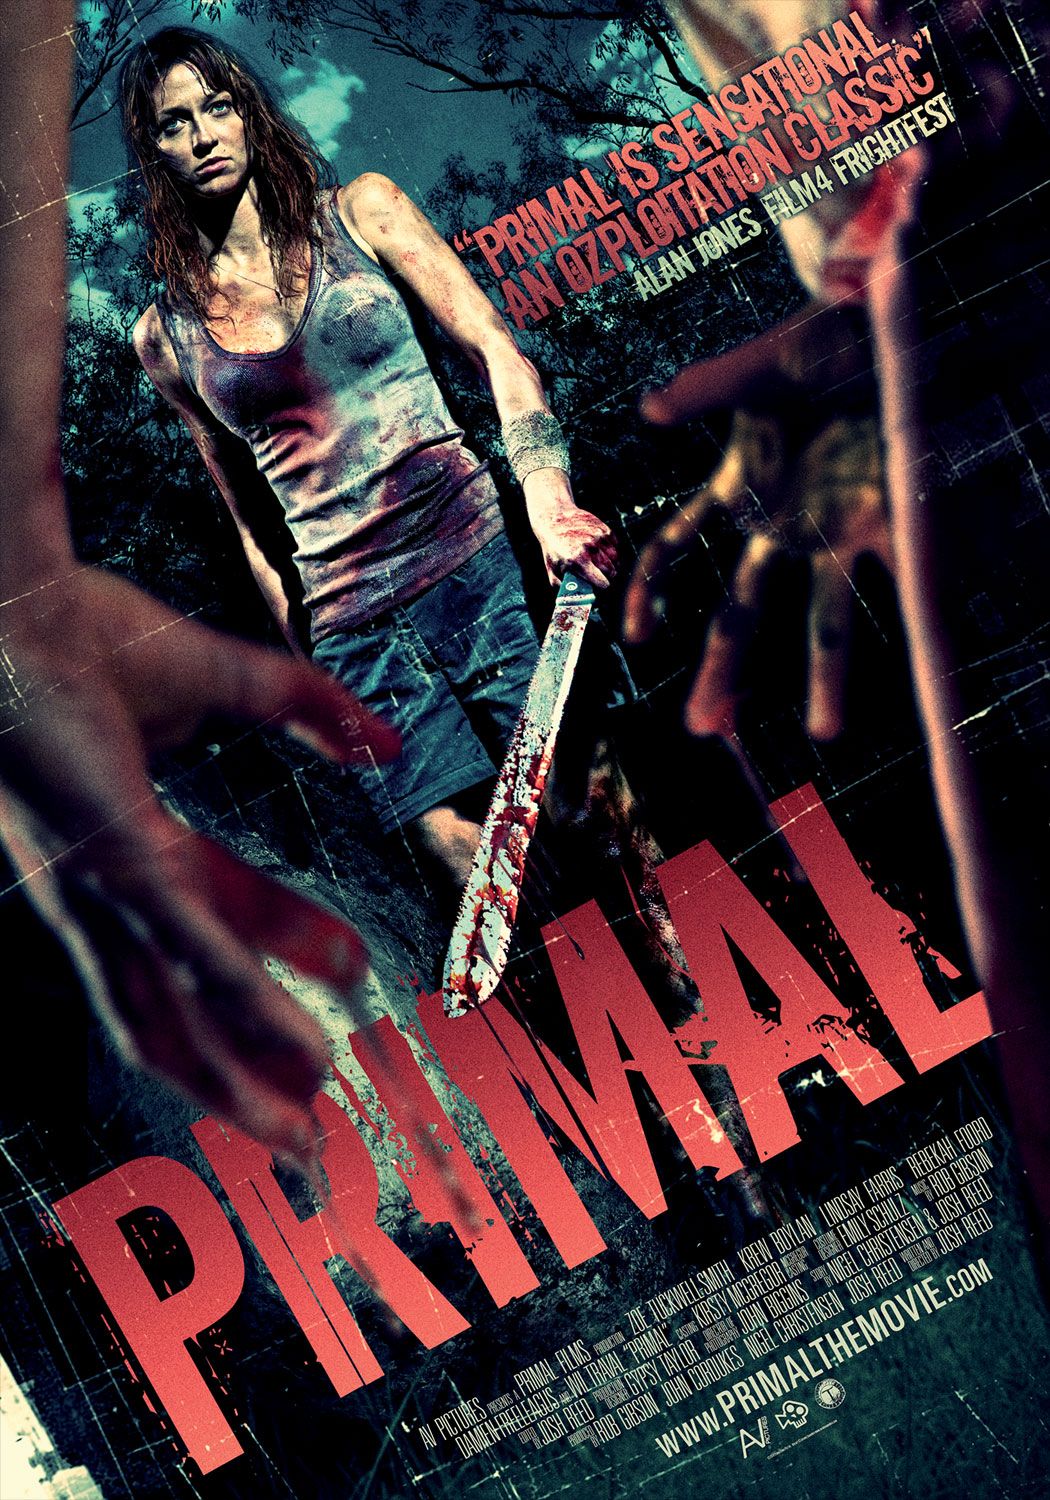 Extra Large Movie Poster Image for Primal (#1 of 2)